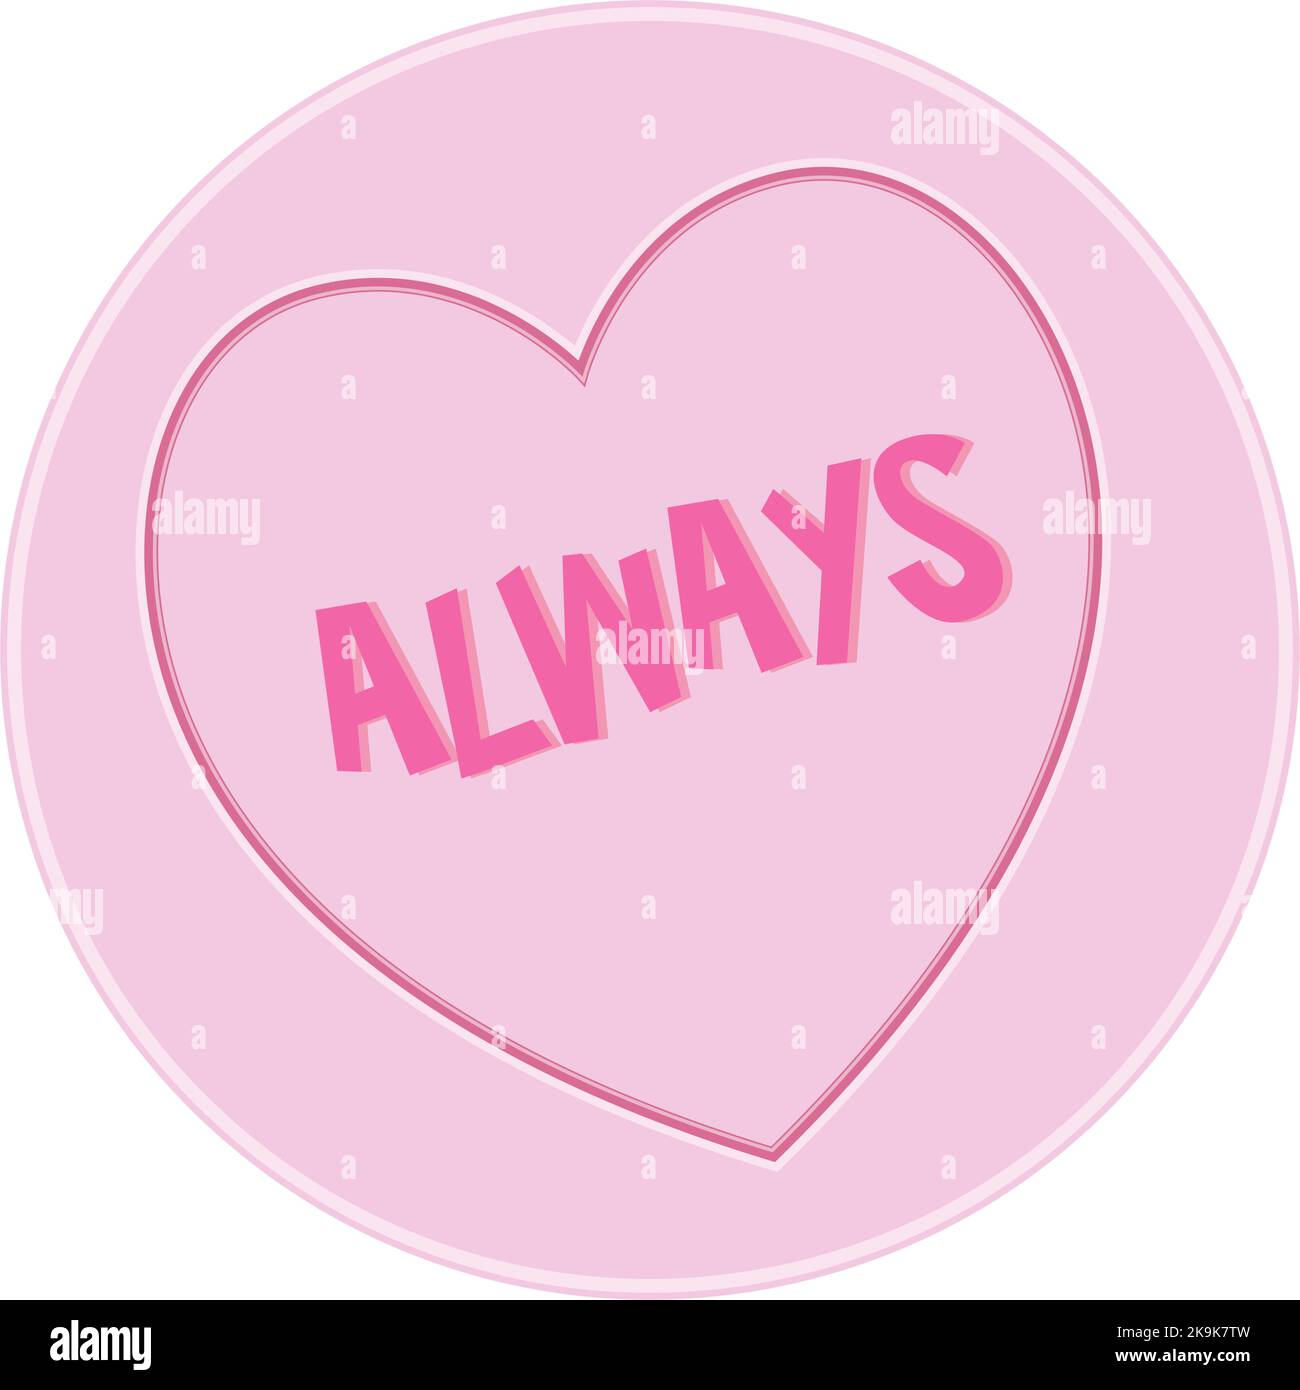 Love heart Sweet Candy - Always Message vector Illustration Stock Vector